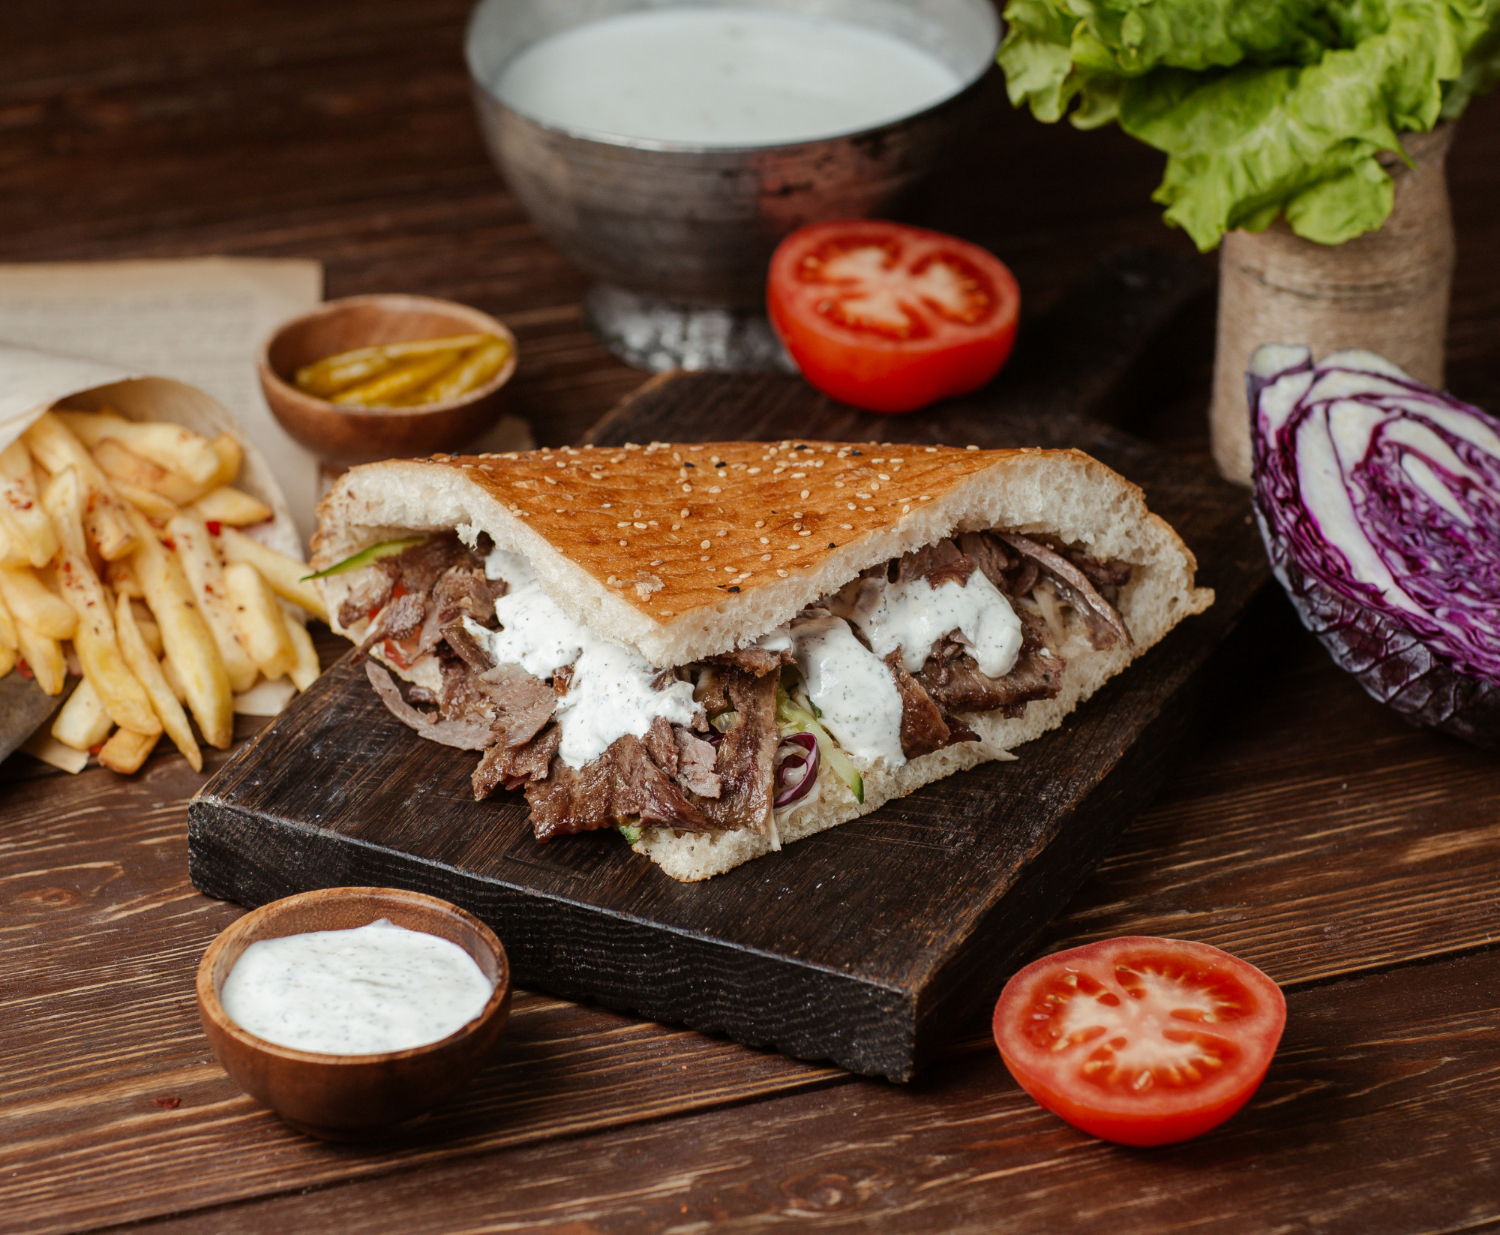 doner burger bread with french fries